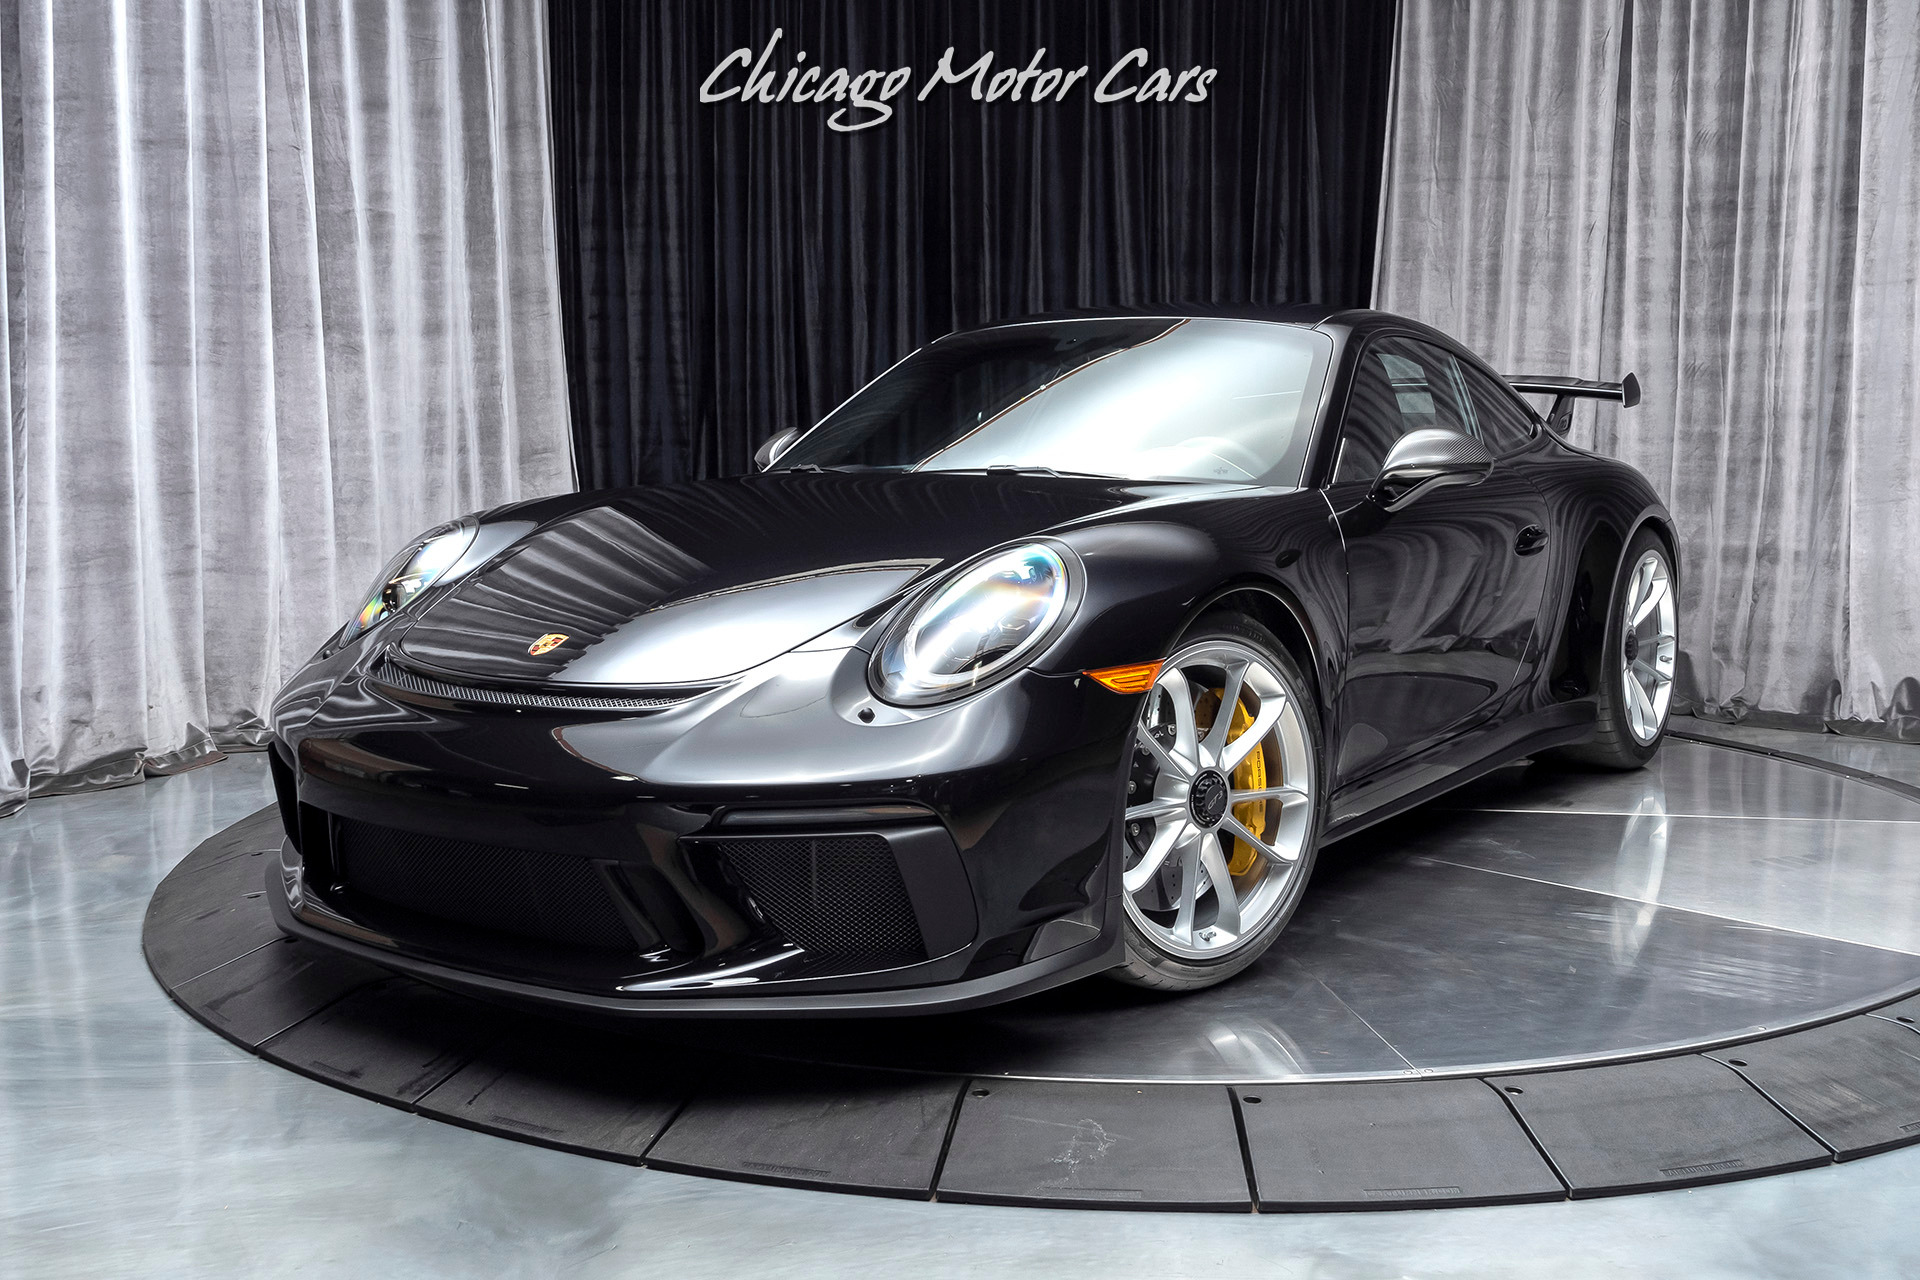 Used-2019-Porsche-911-GT3-Coupe-MSRP-183K-1K-MILES-MANUAL-TRANS-ENTIRE-CAR-PROTECTION